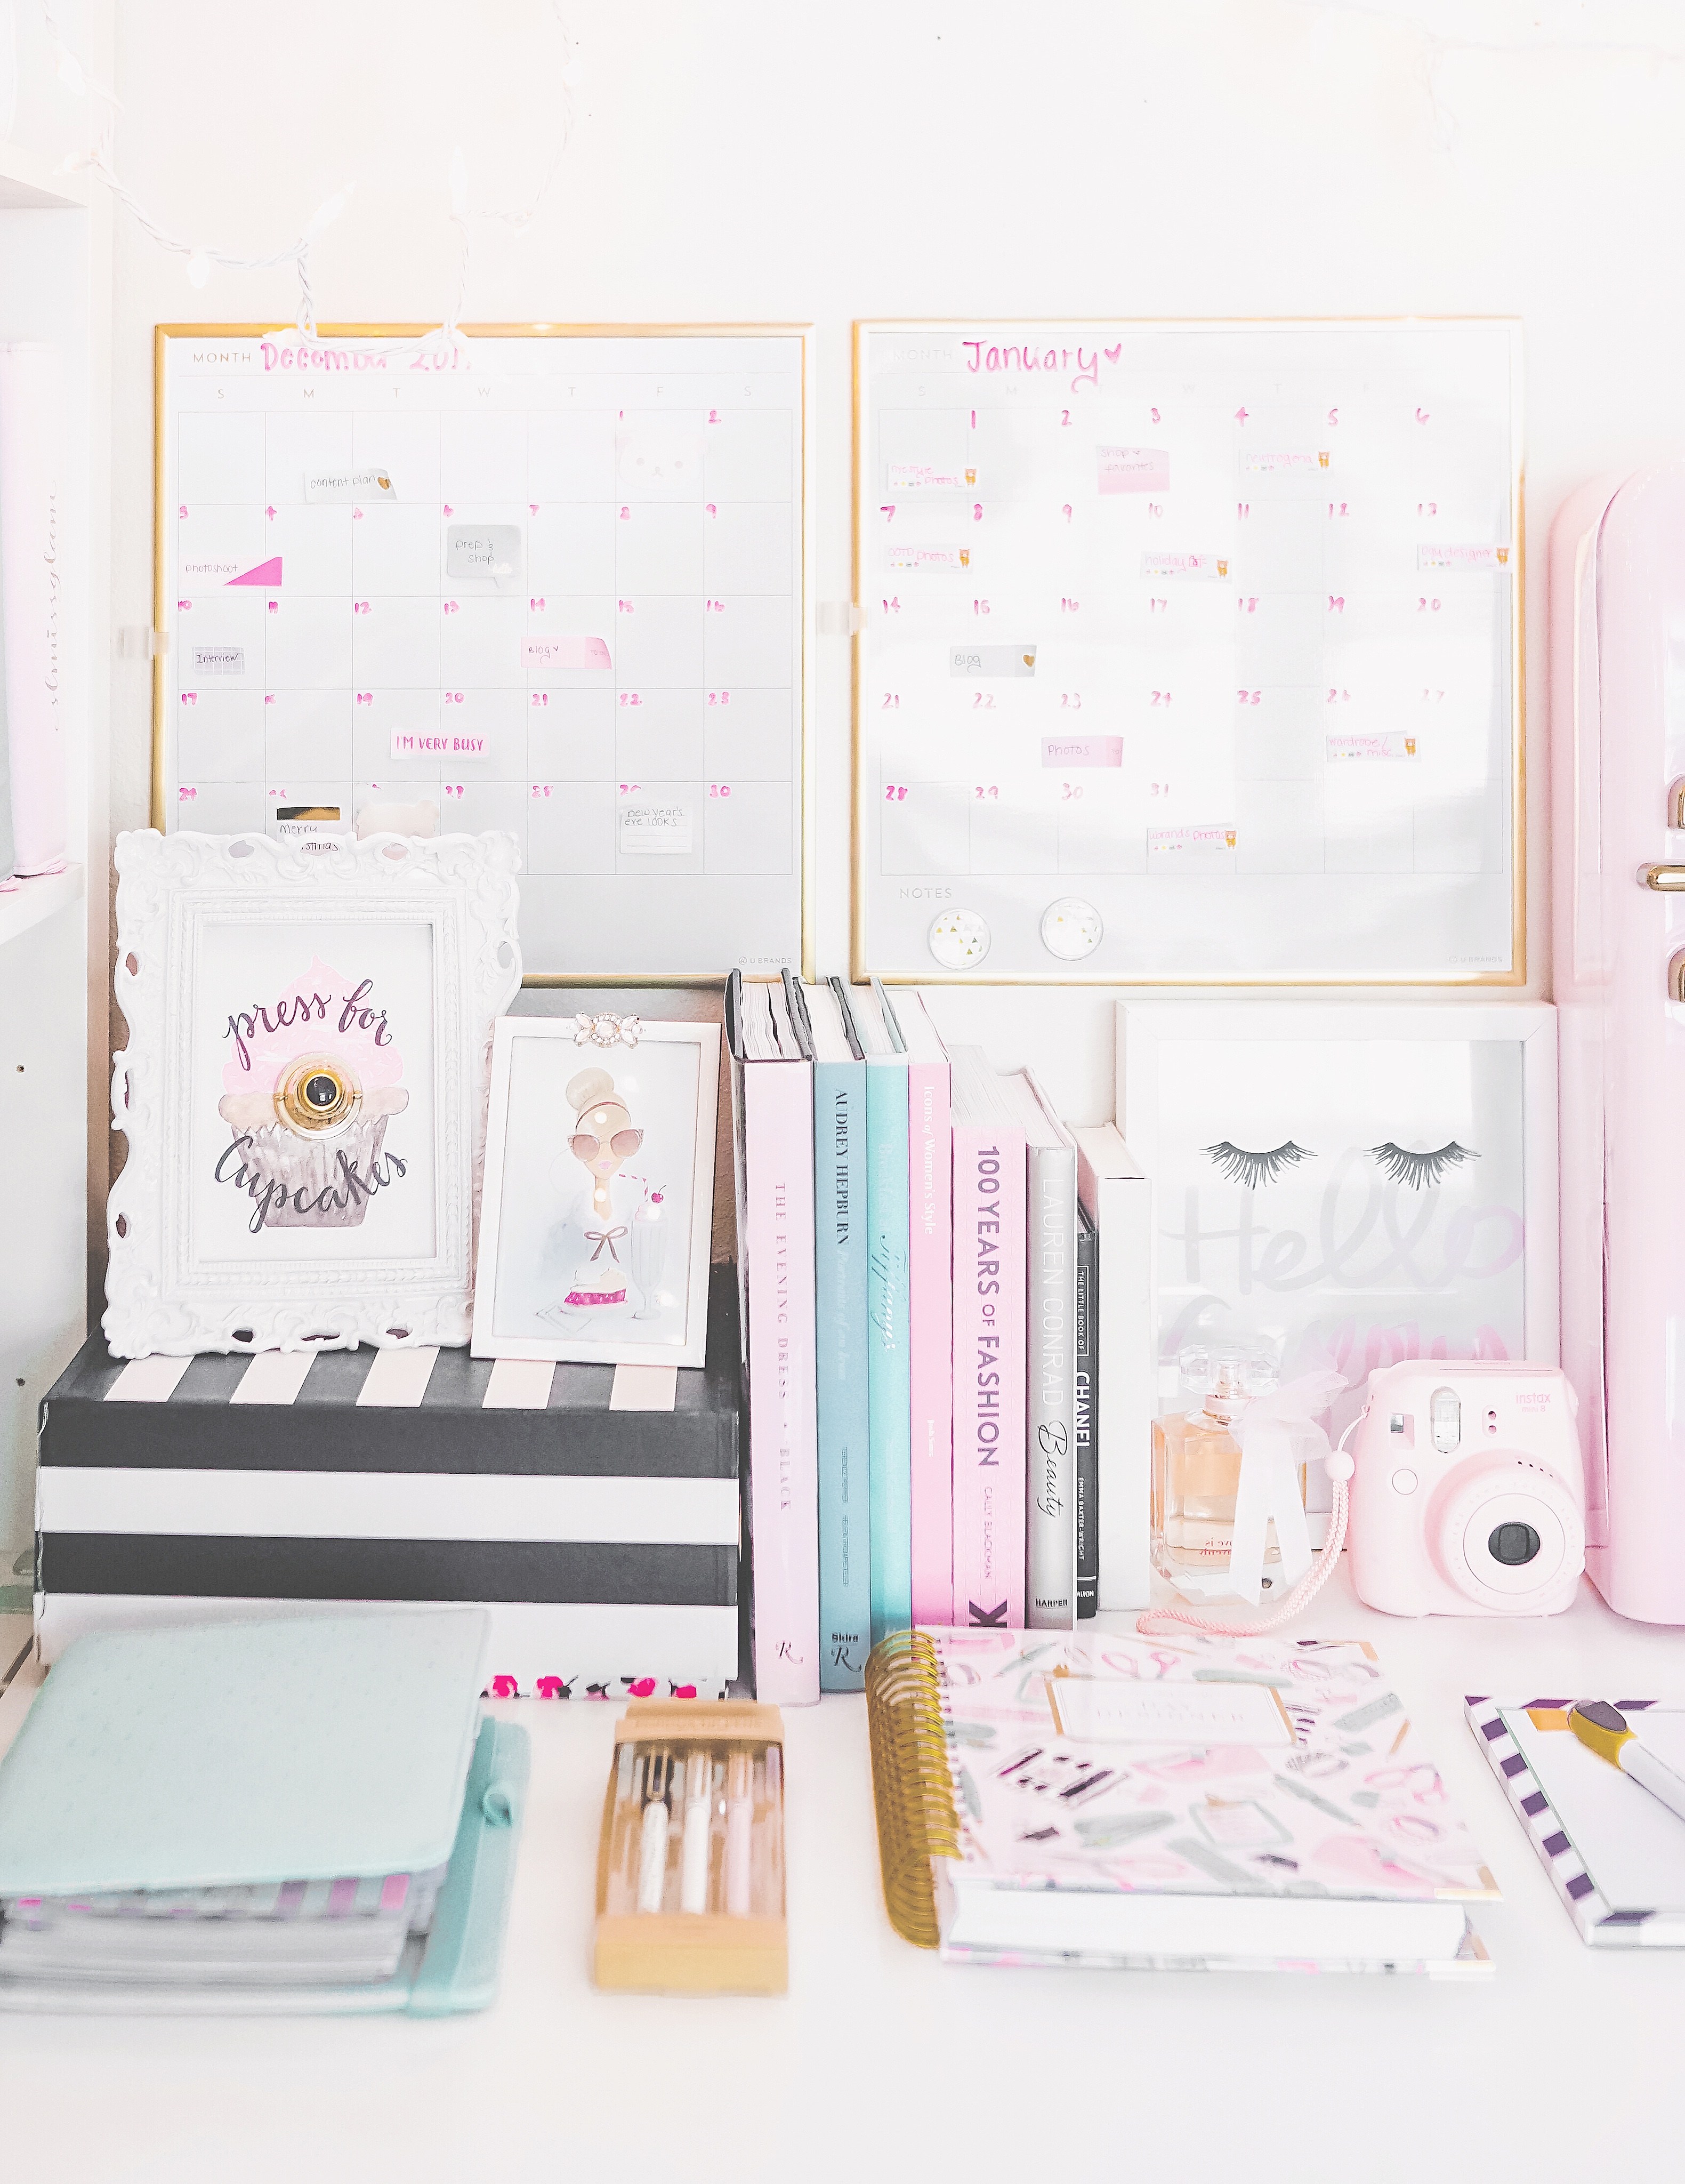 Pretty Little Things For Staying Organized by Ubrands